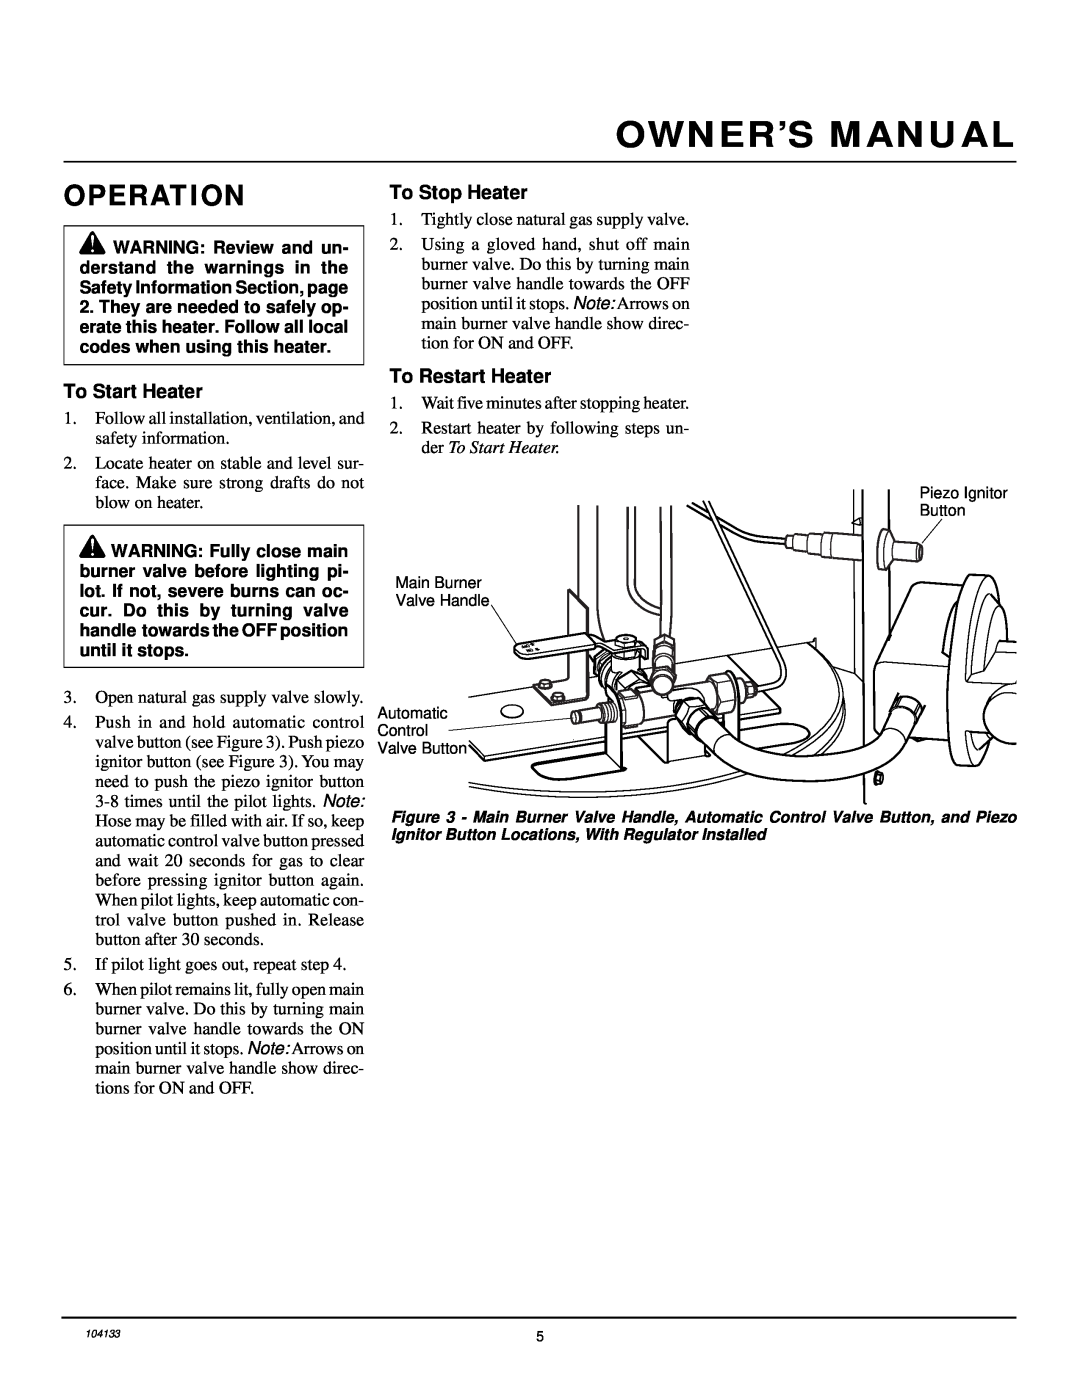 Desa TC250RNG owner manual Operation, To Stop Heater, To Start Heater, To Restart Heater 